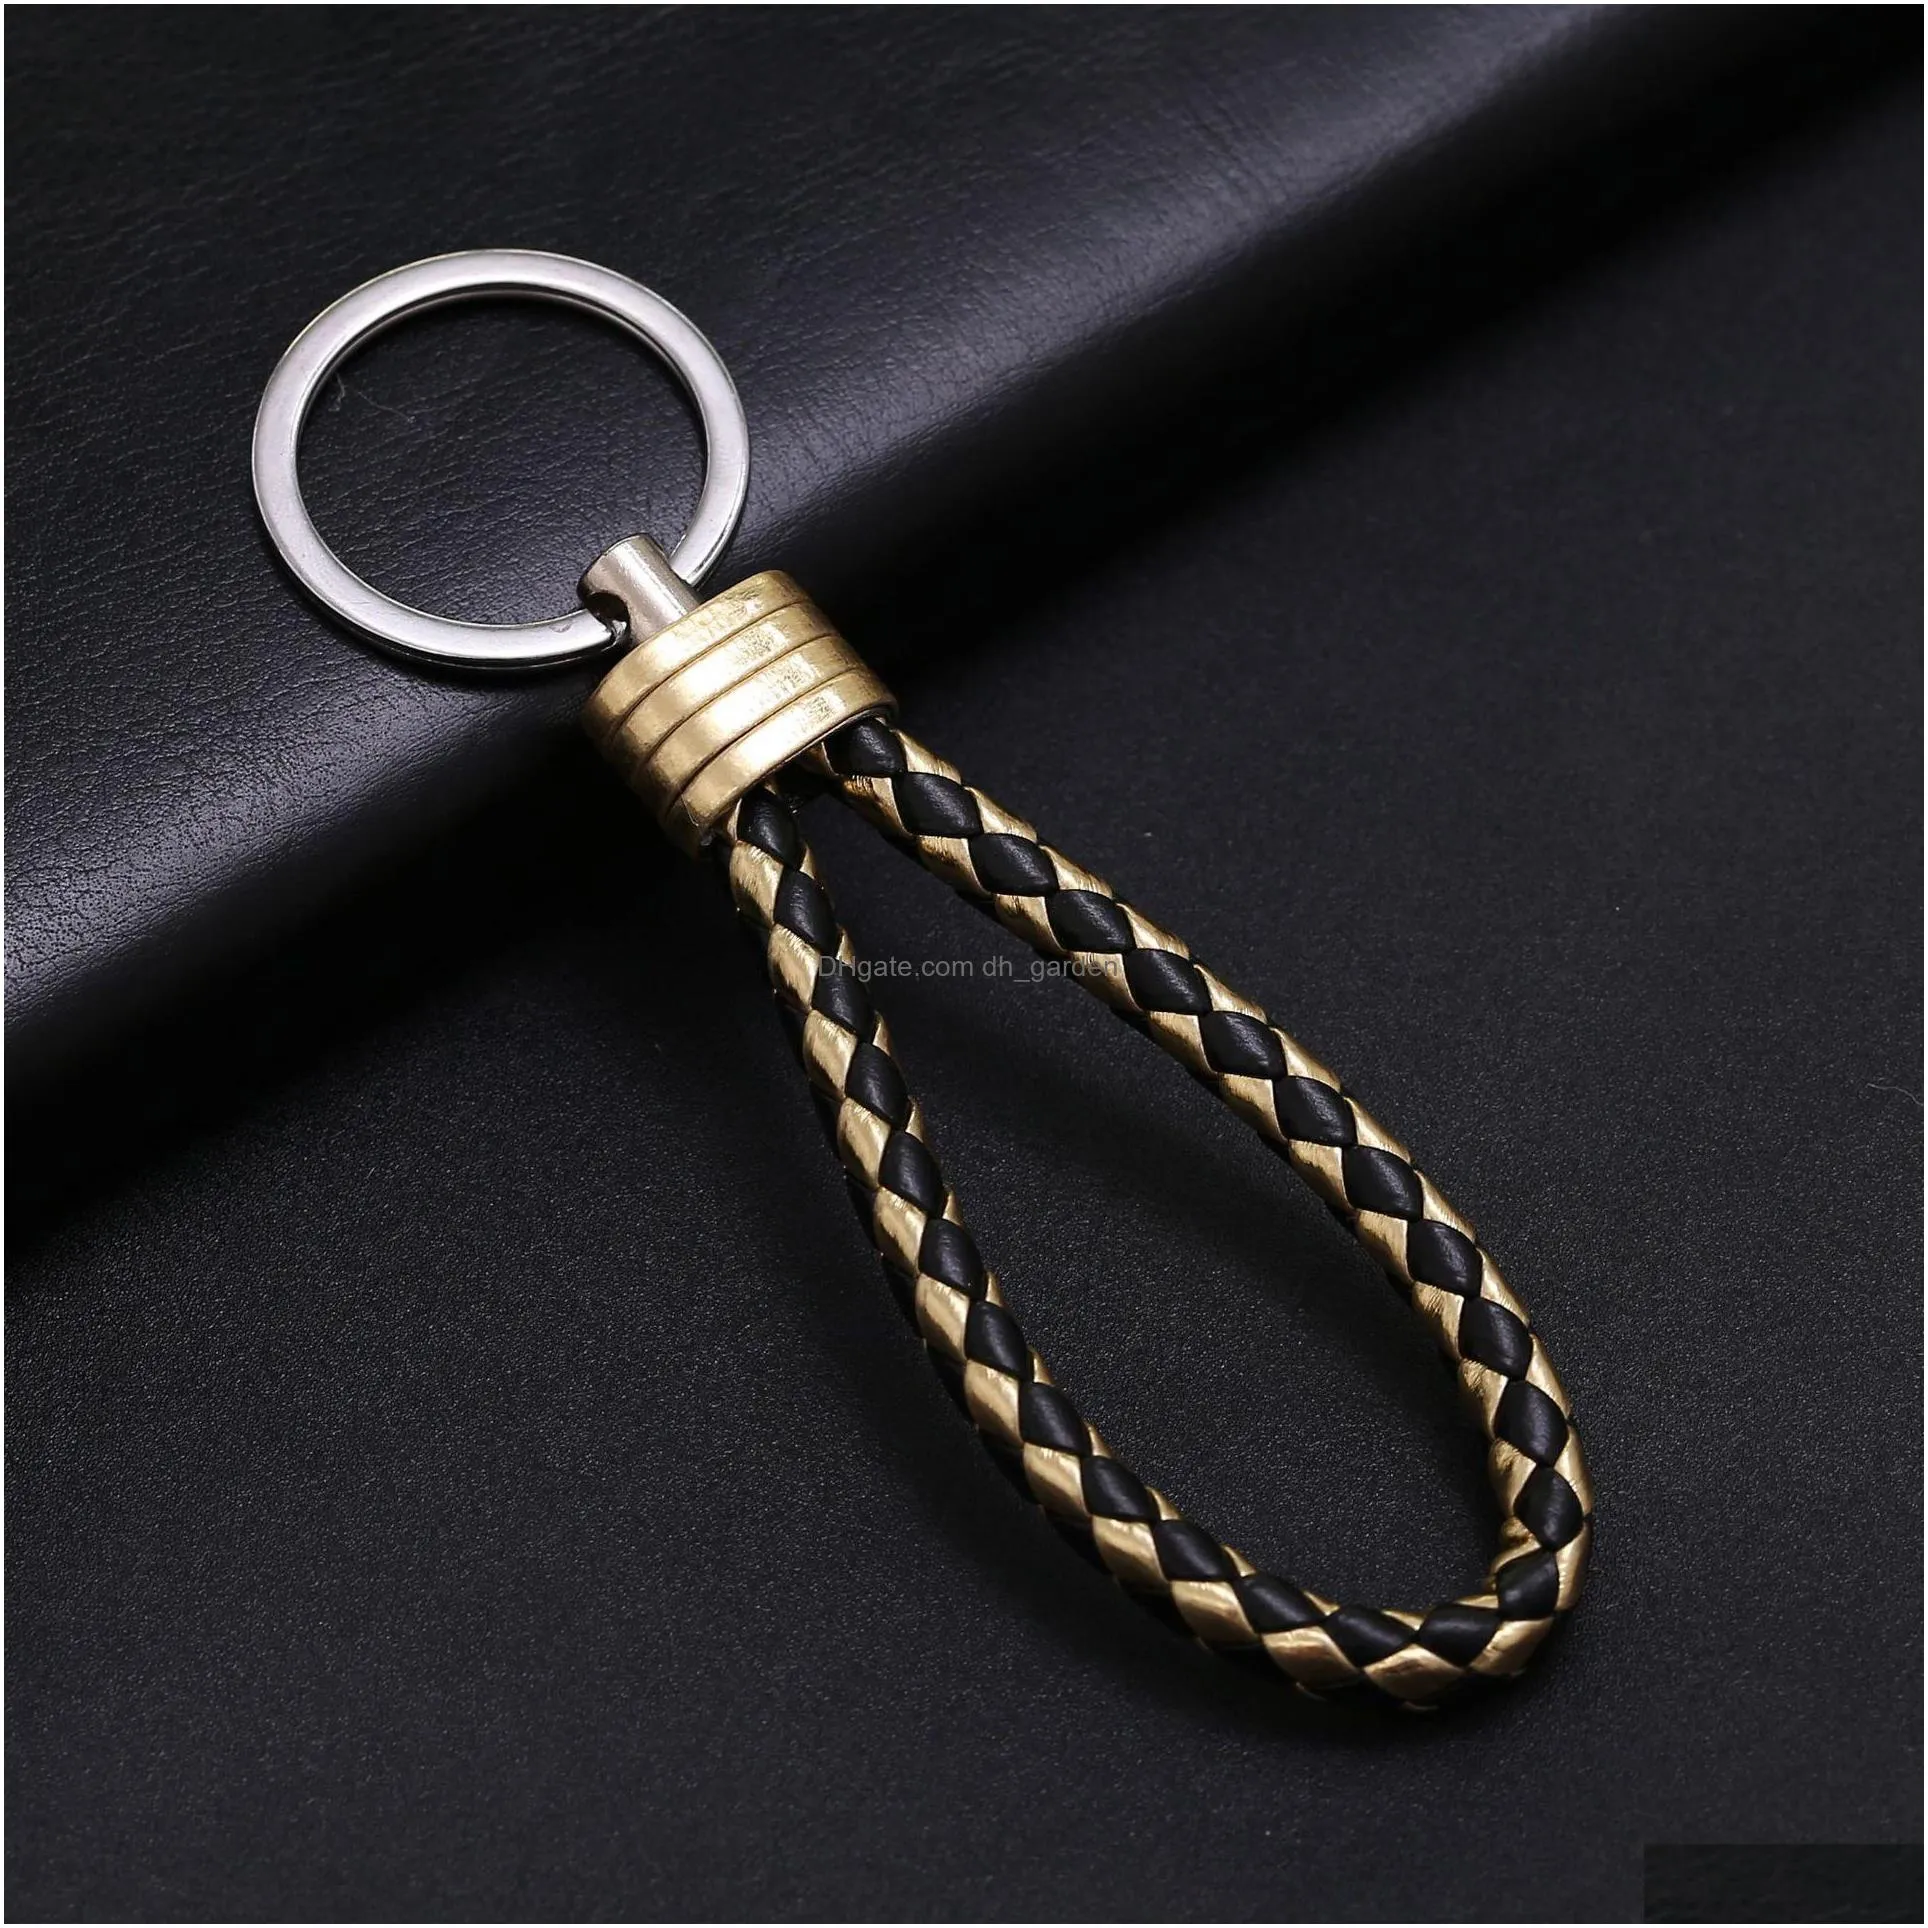 woven leather rope key chain highgrade keyring personalized creative automobile gifts wholesale